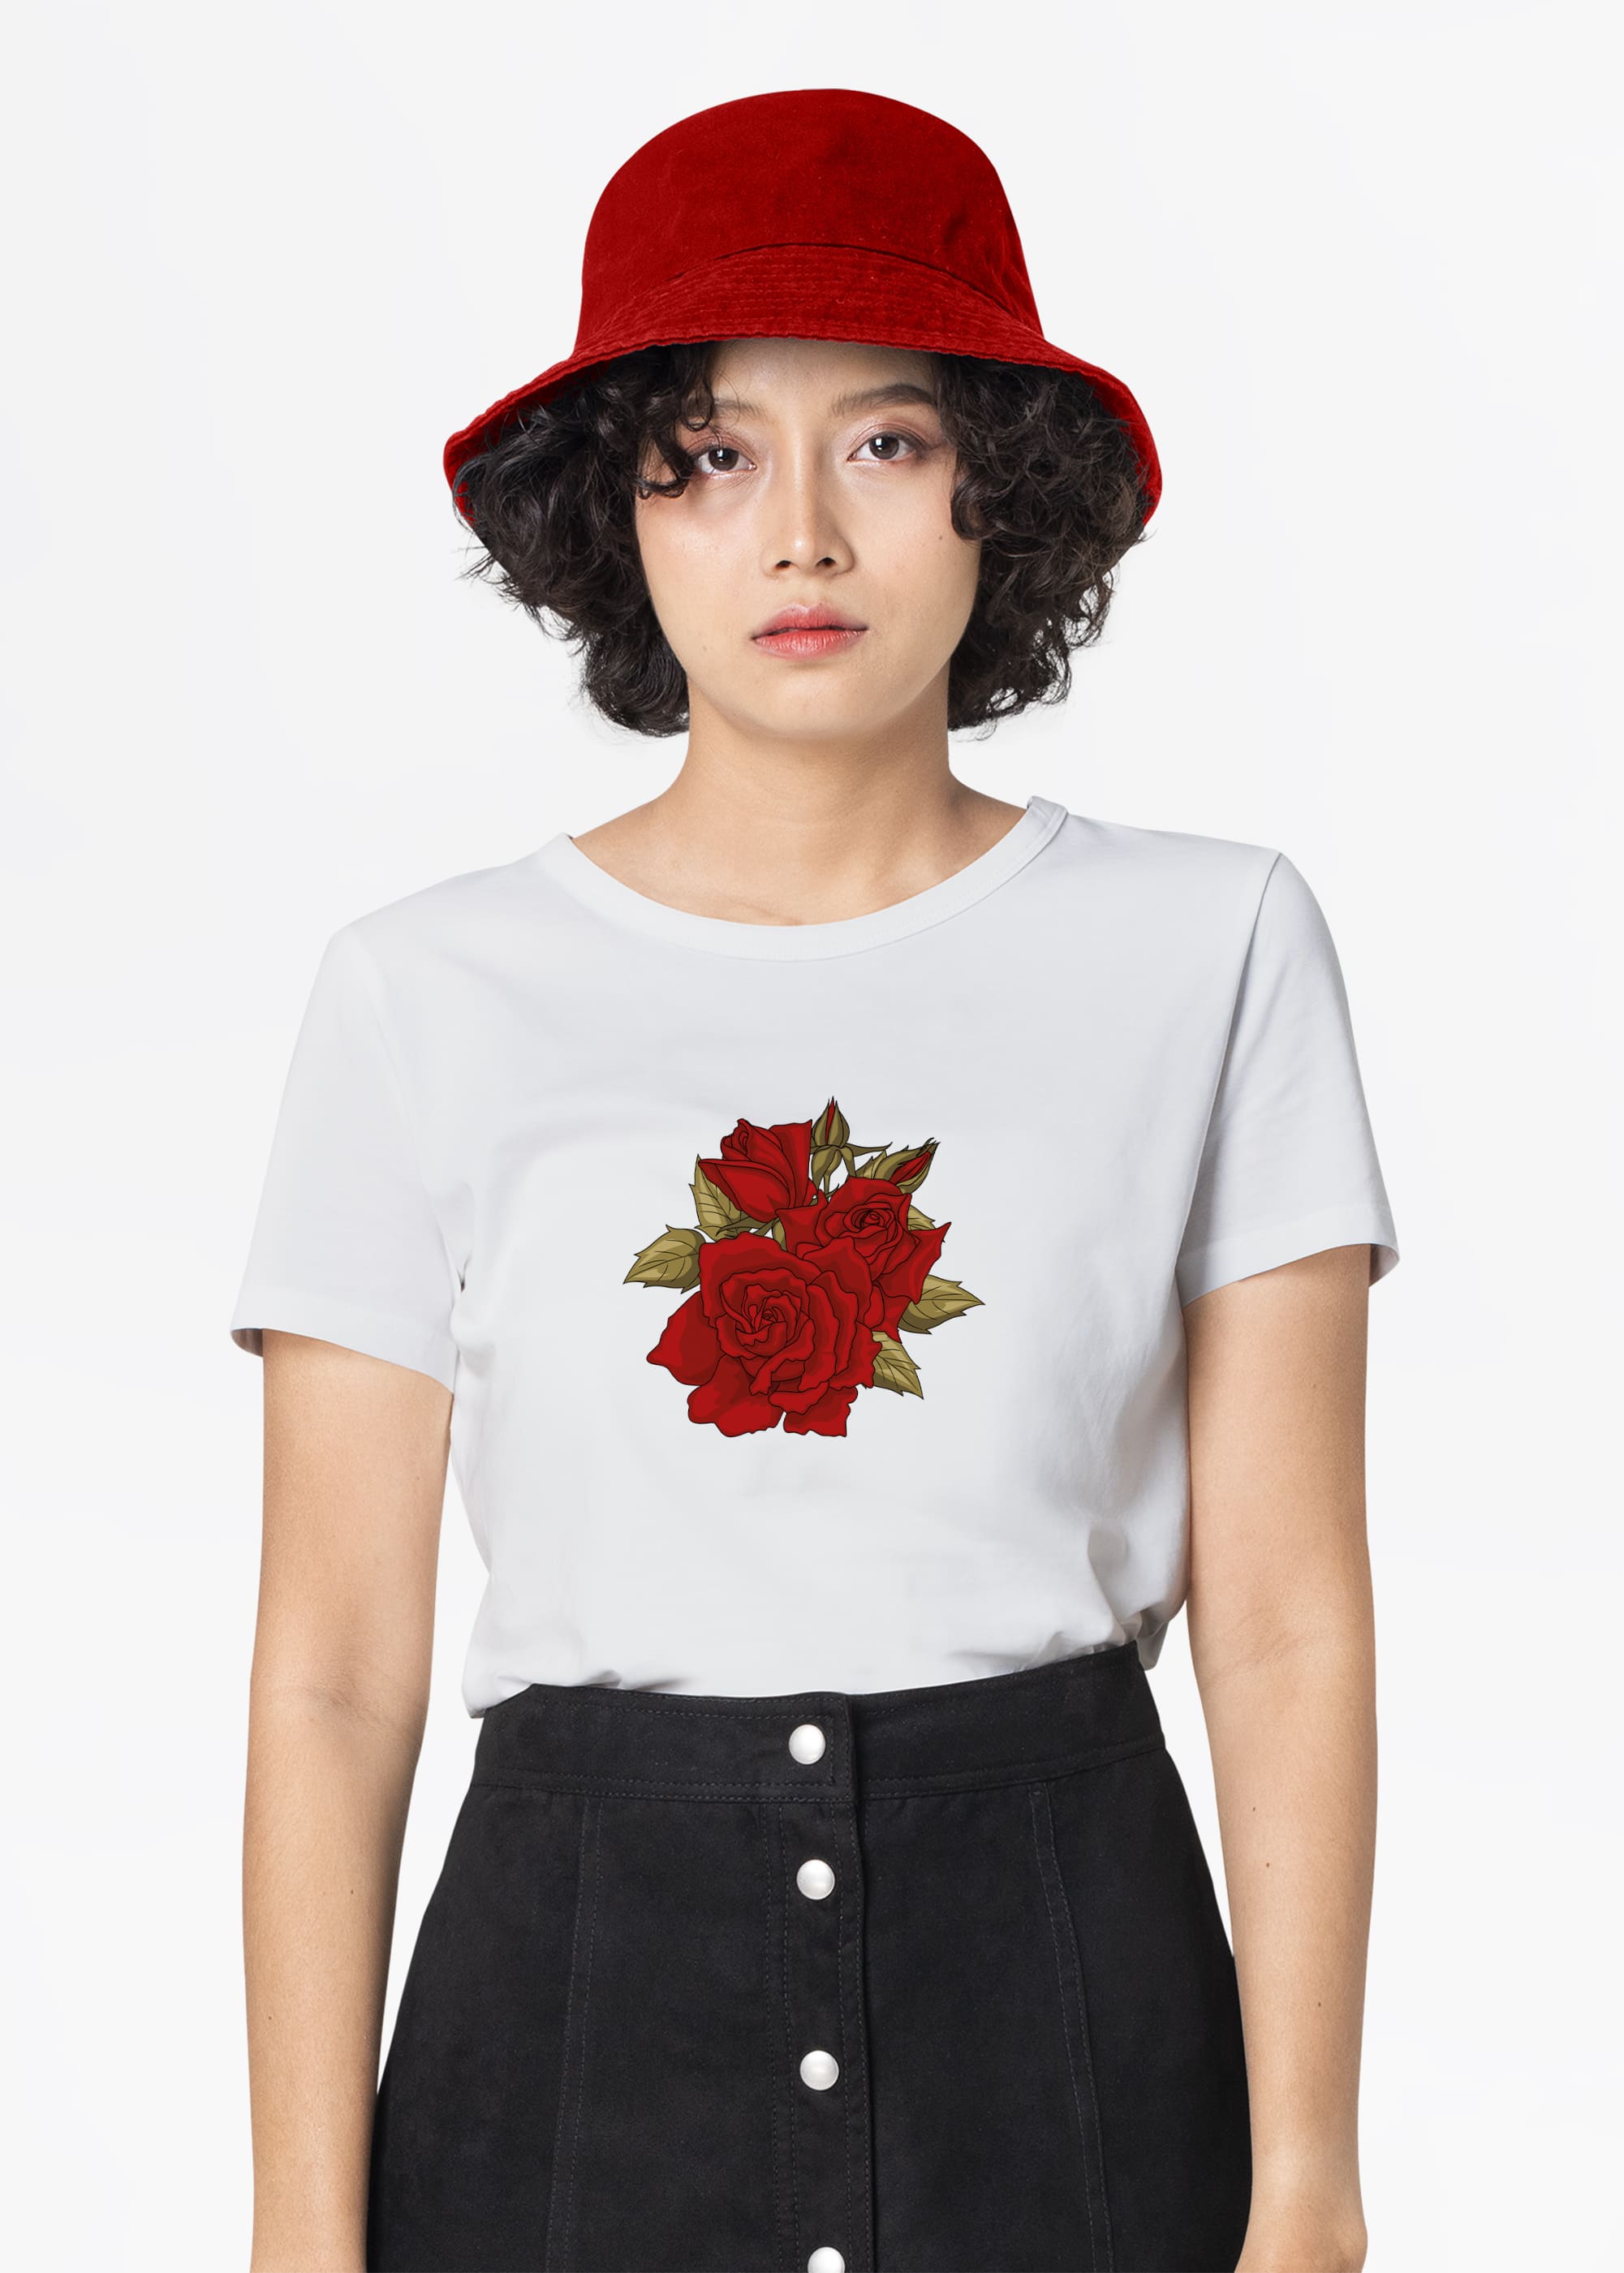 Blossom red rose on a white t-shirt.